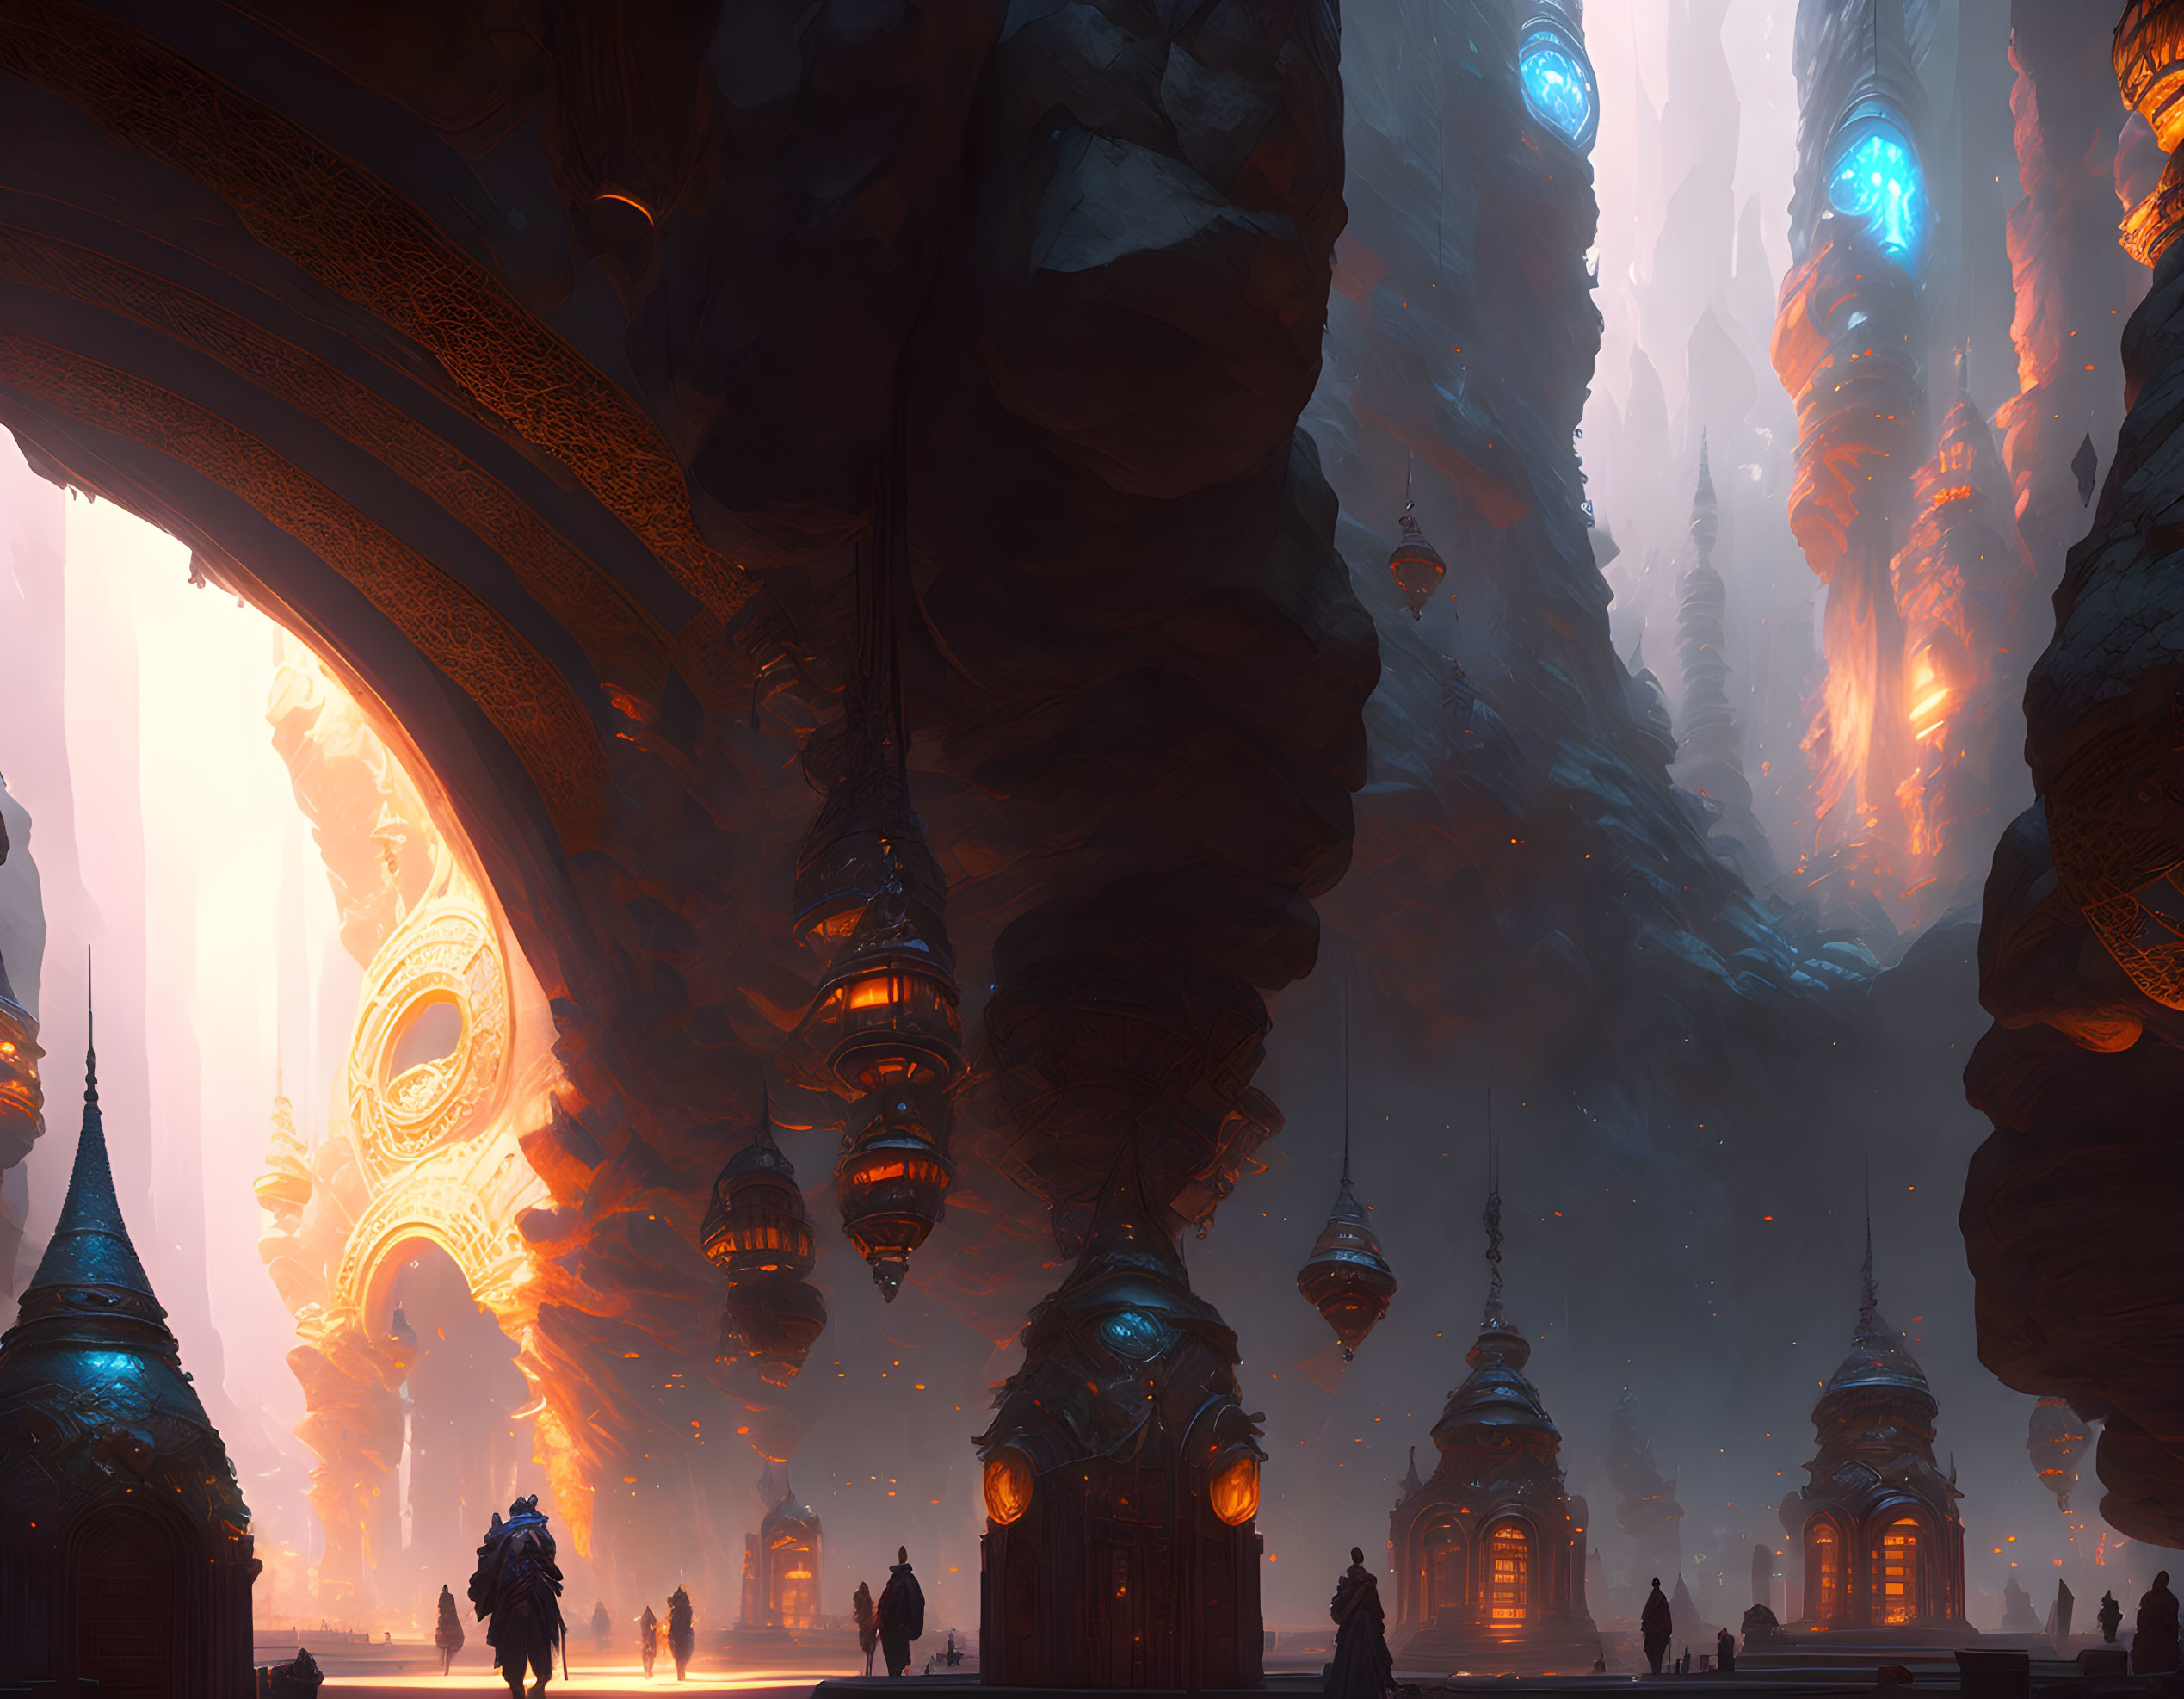 Ethereal cavern with towering structures and glowing lights